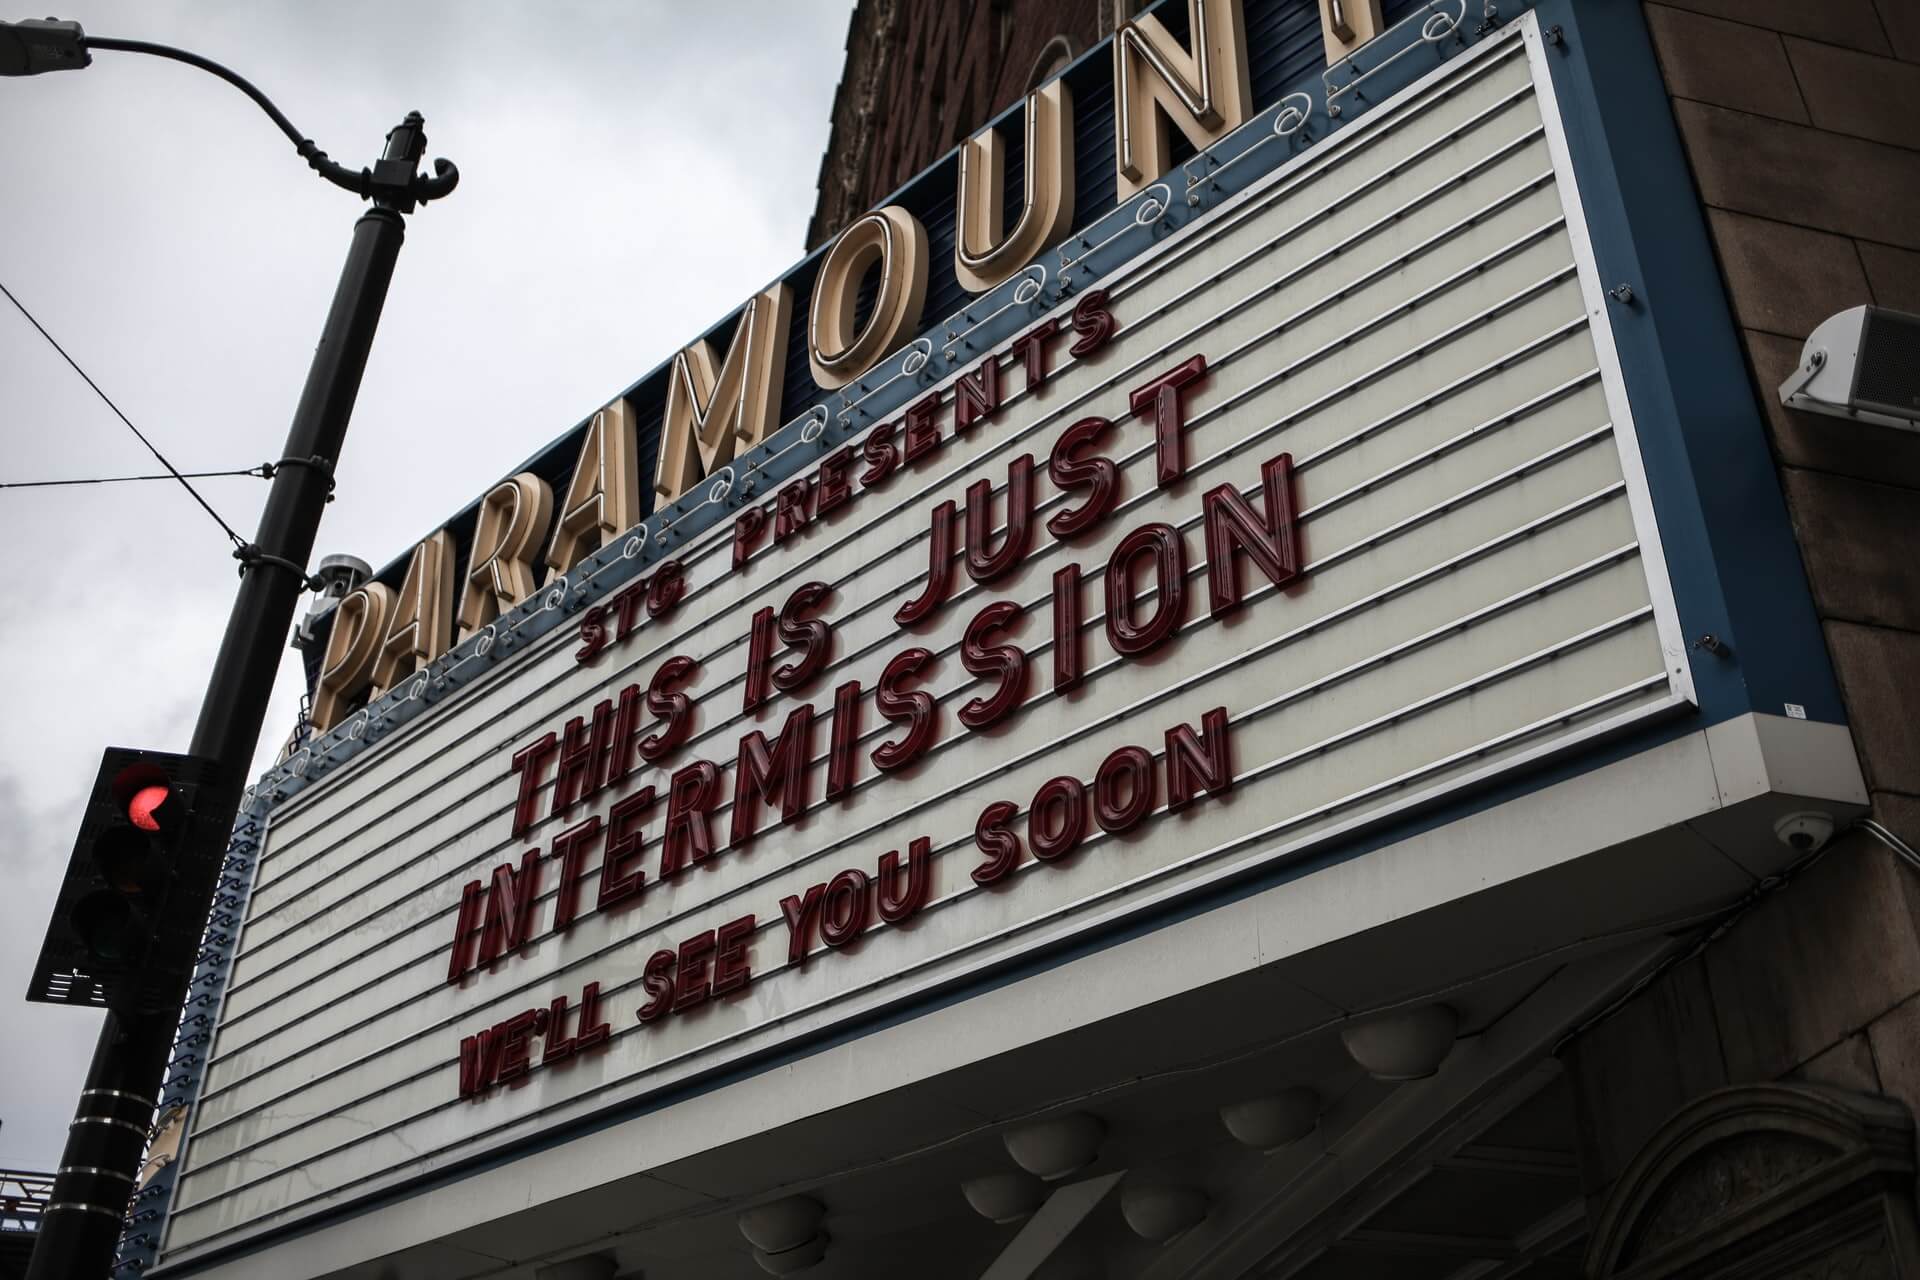 Movie theater sign that reads "This is just intermission" temporary closure message